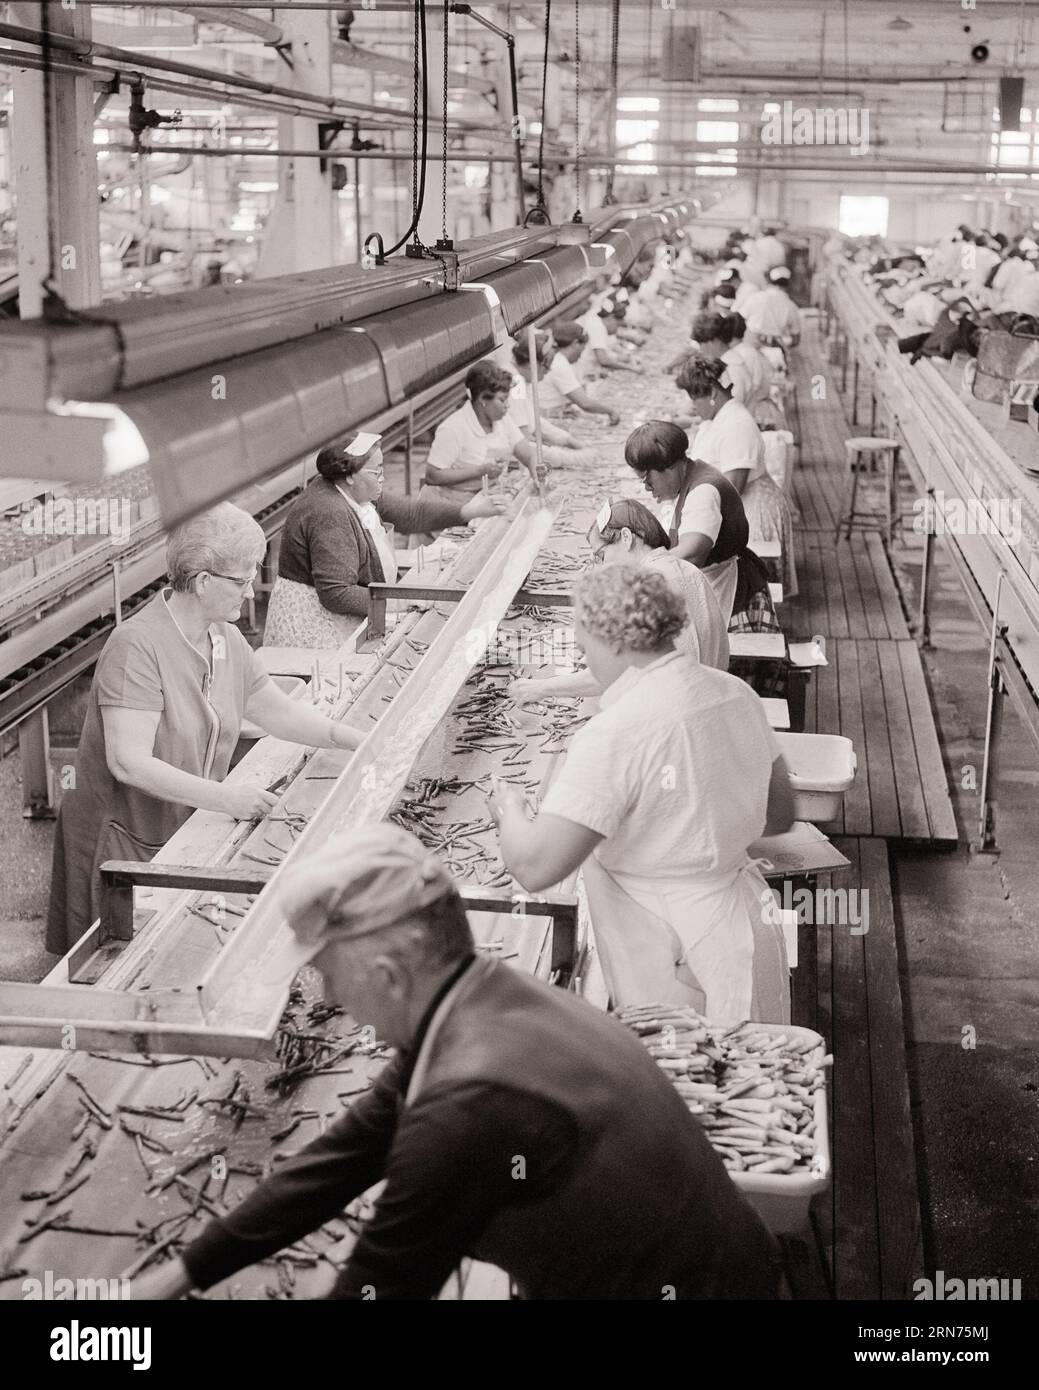 1970s FOOD PROCESSING FACTORY MEN AND WOMEN ON CONVEYOR BELT LINE SORTING ASPARAGUS - i5902 HAR001 HARS PROCESSING MIDDLE-AGED WOMAN HIGH ANGLE AFRICAN-AMERICANS AFRICAN-AMERICAN AND BLACK ETHNICITY LABOR EMPLOYMENT OCCUPATIONS ASPARAGUS CONVEYOR EMPLOYEE COOPERATION MID-ADULT MID-ADULT WOMAN BLACK AND WHITE CAUCASIAN ETHNICITY FOOD PROCESSING HAR001 LABORING OLD FASHIONED AFRICAN AMERICANS Stock Photo